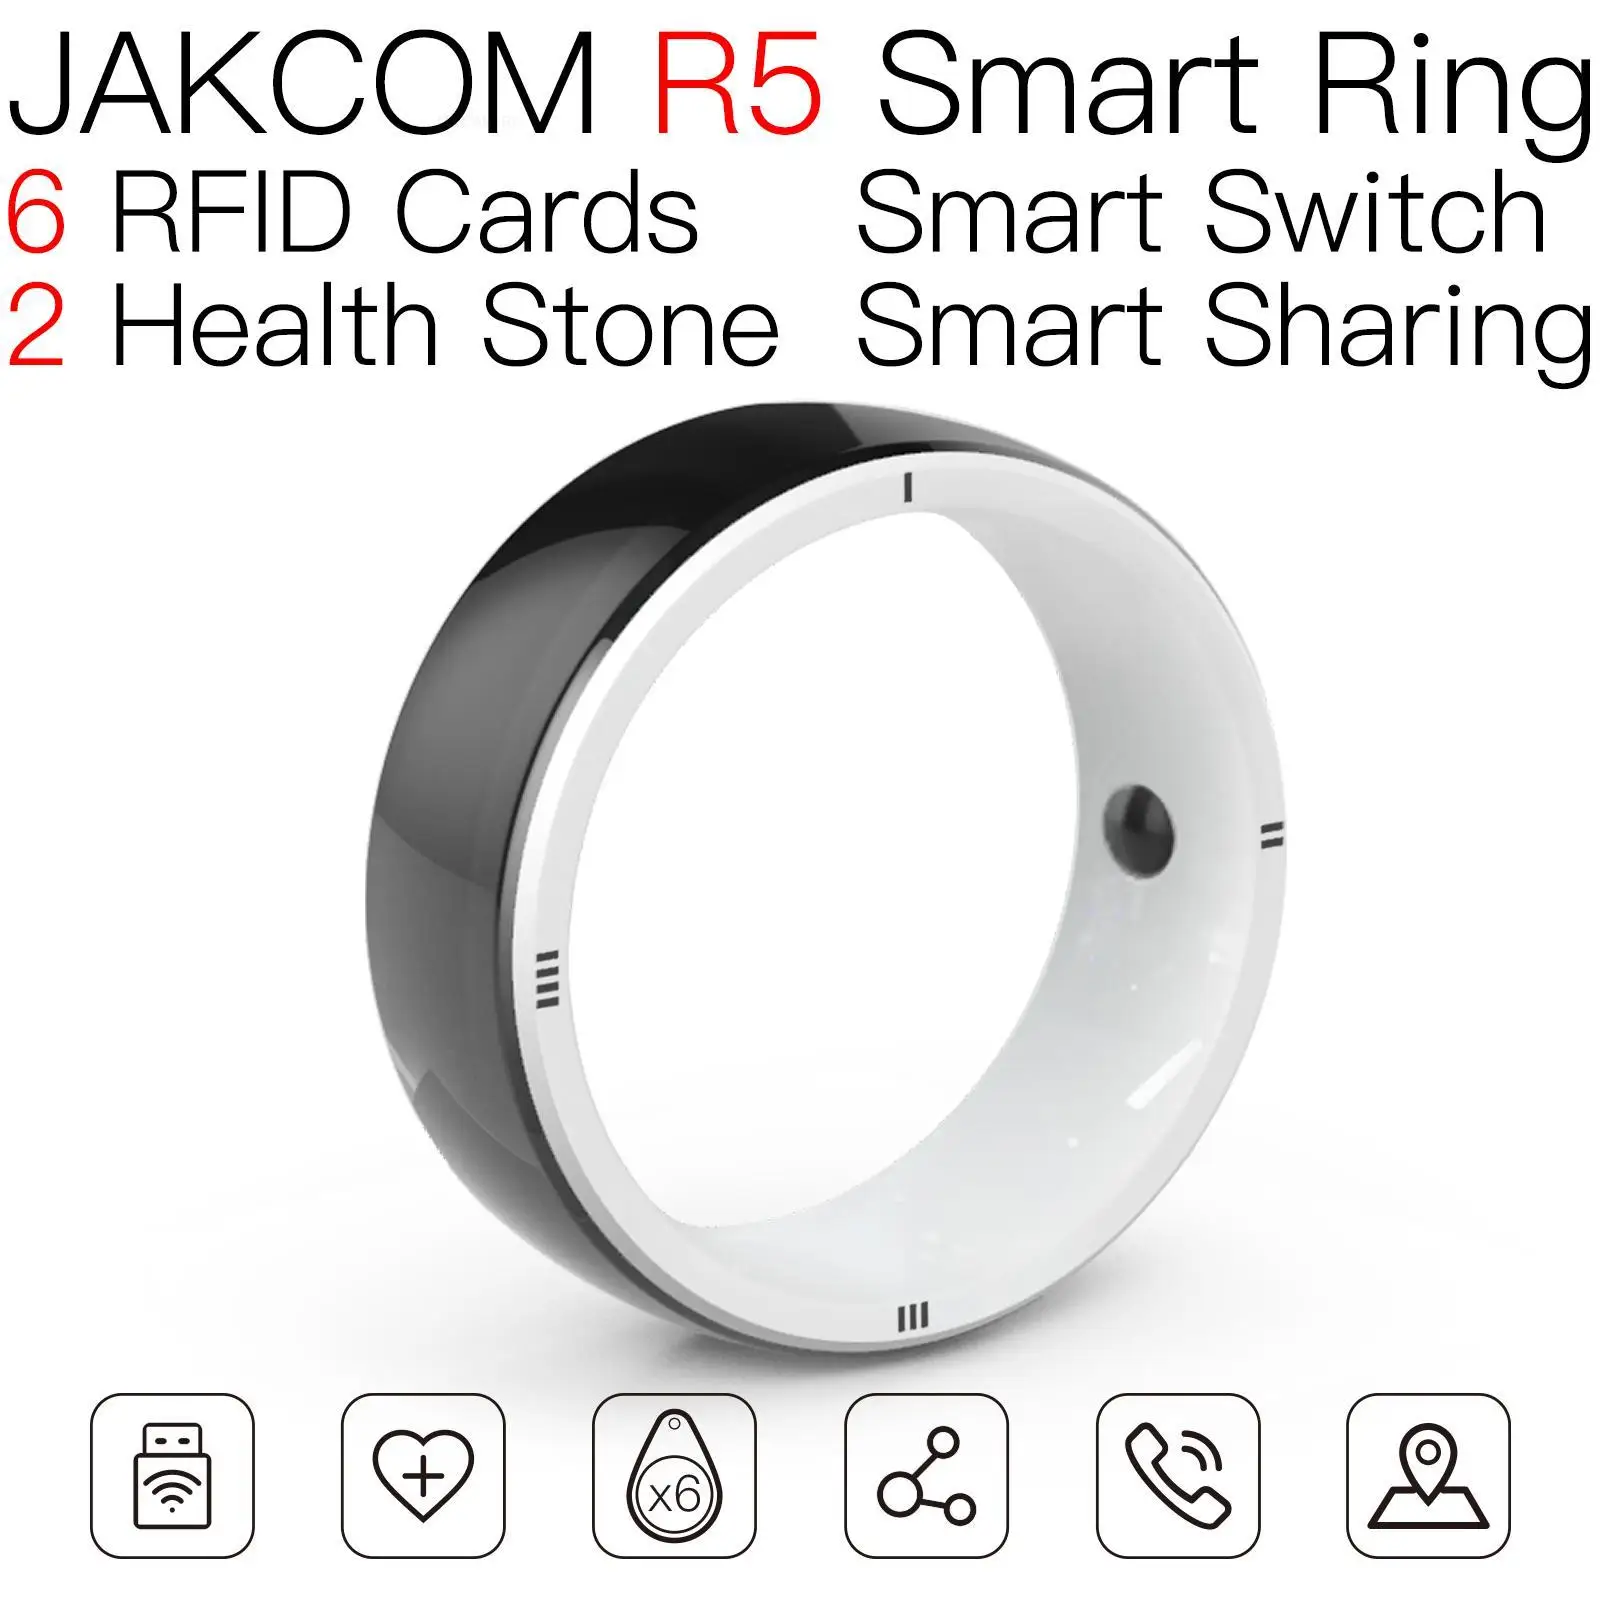 

JAKCOM R5 Smart Ring Match to pigeon ring free spi realme band 2 tarrot card nfc smart chip dna etiquette autocollant rf id